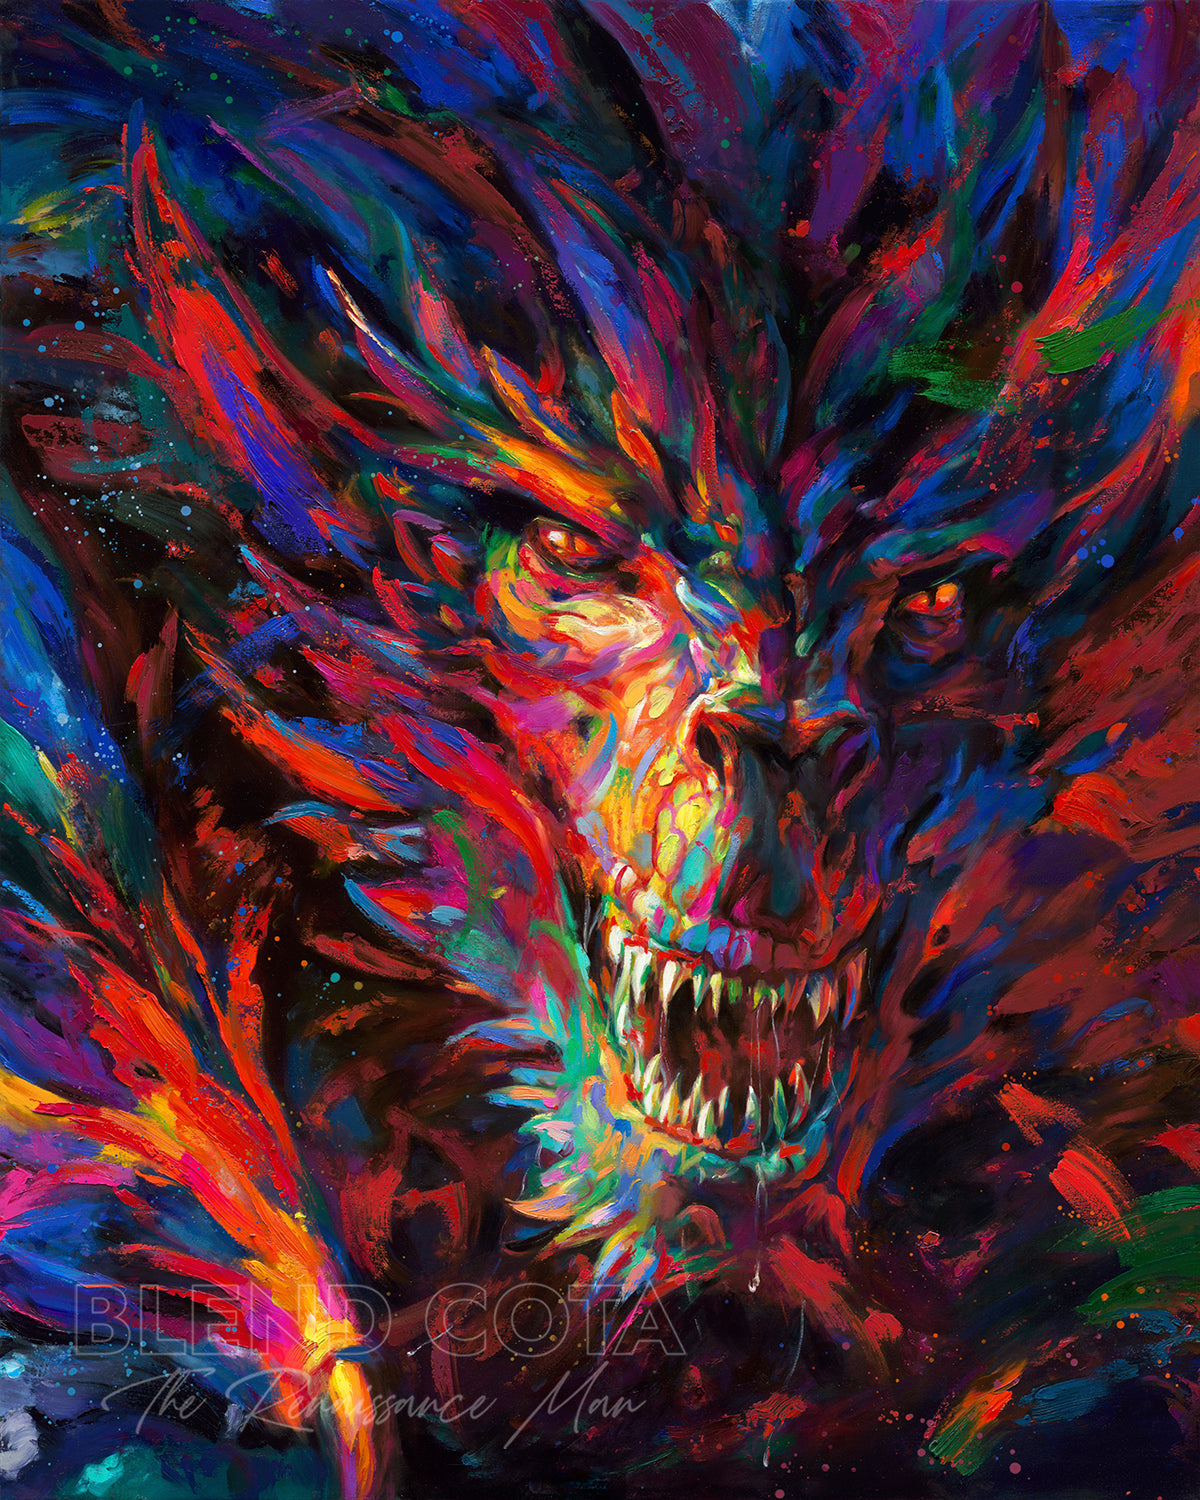 Gallery wrapped art print on canvas of the dragon of war, legendary mythical being engulfed in red and blue flame, emerging from darkness with colorful brushstrokes in an expressionistic style.